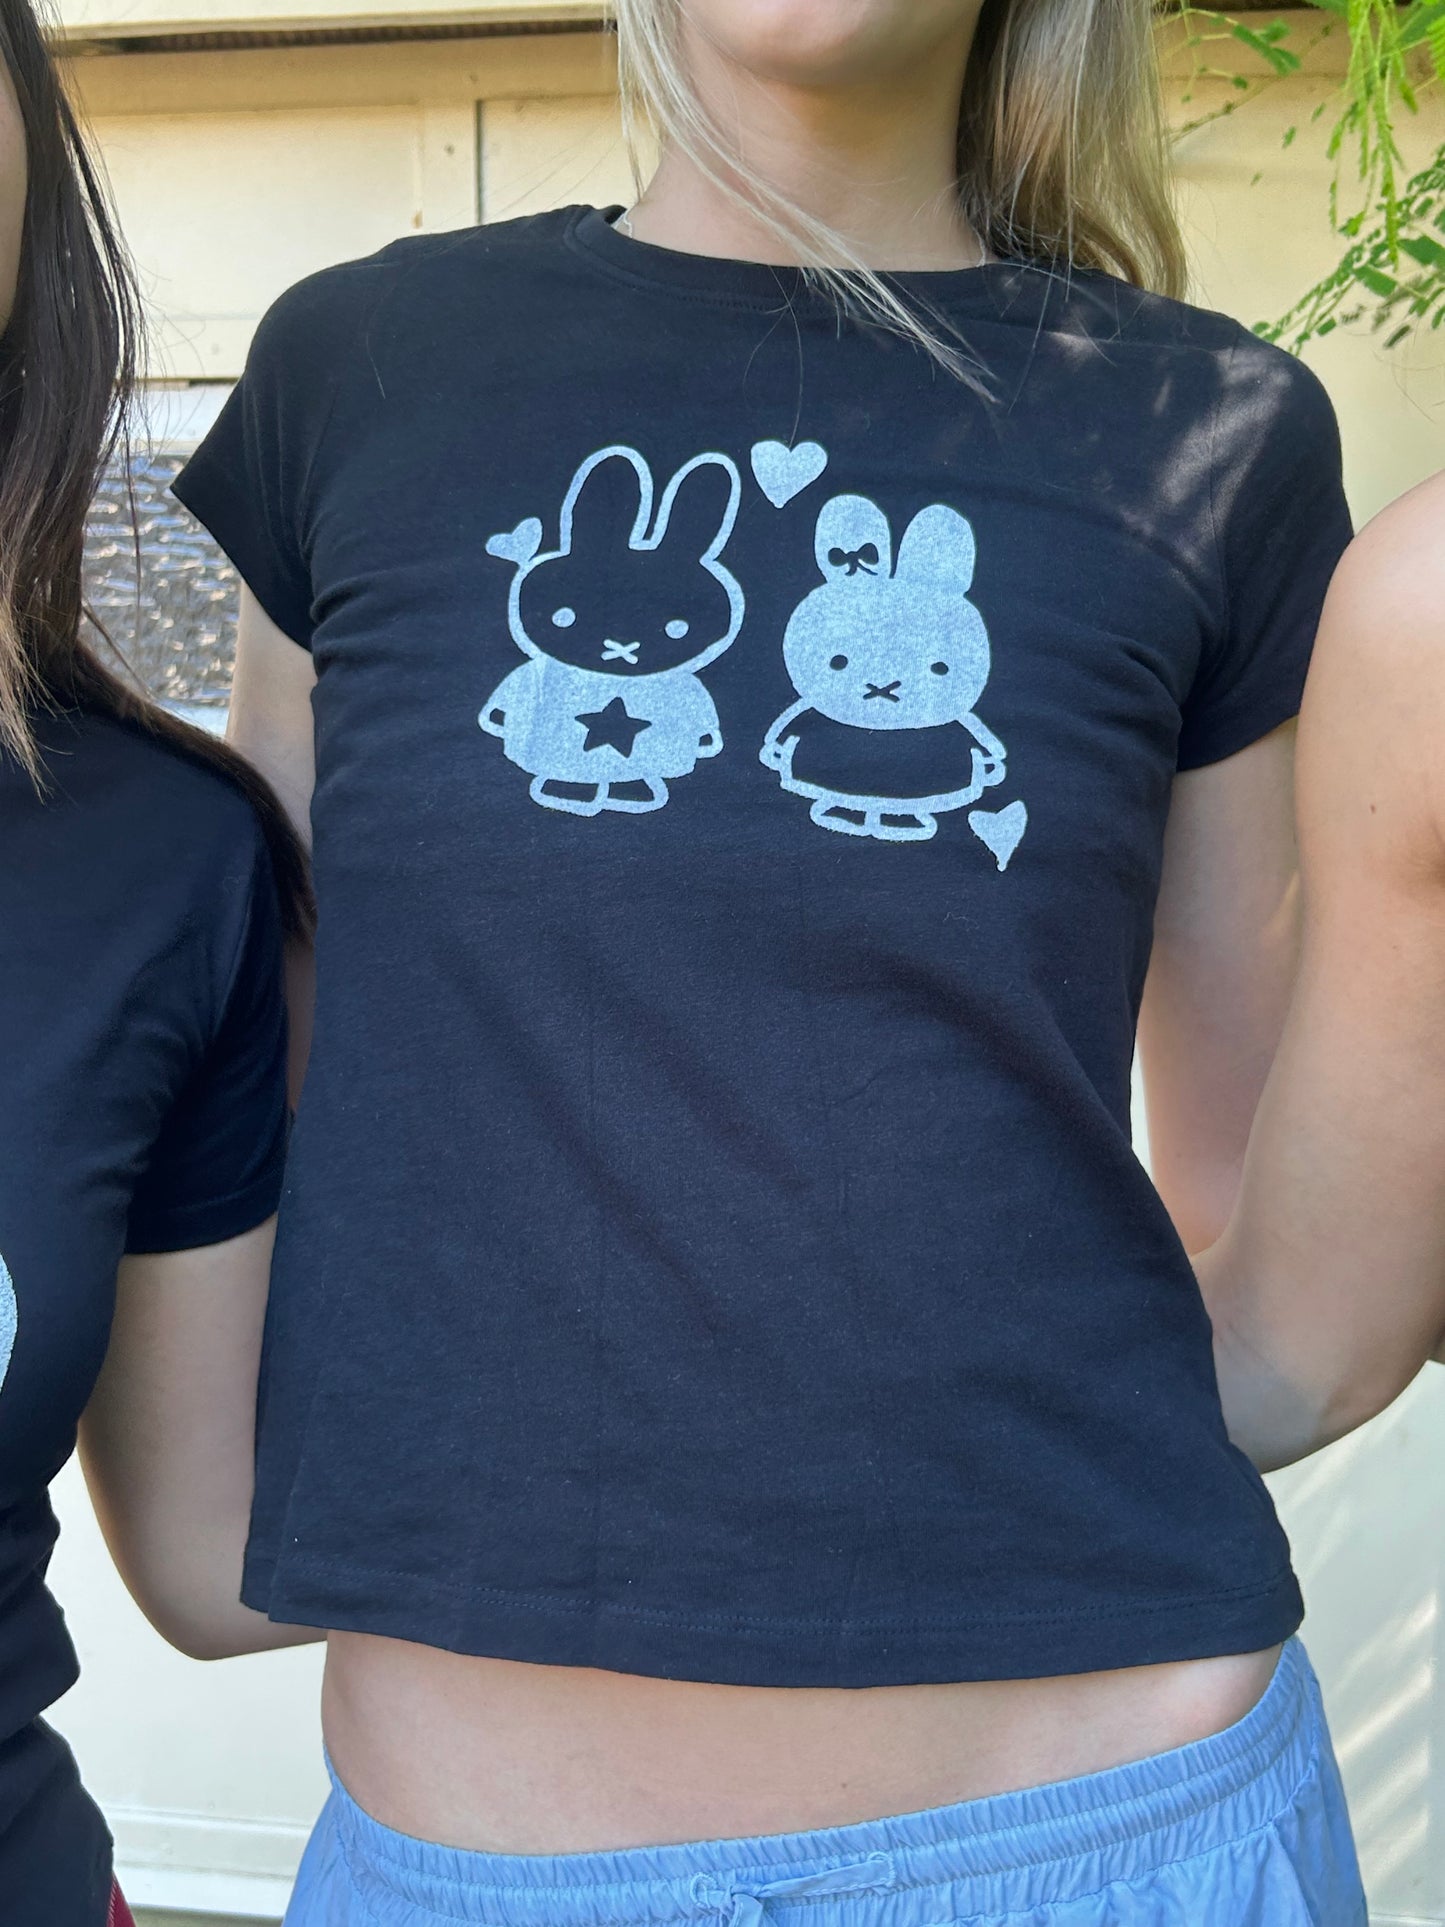 The Miffys in Love Baby Tee in black